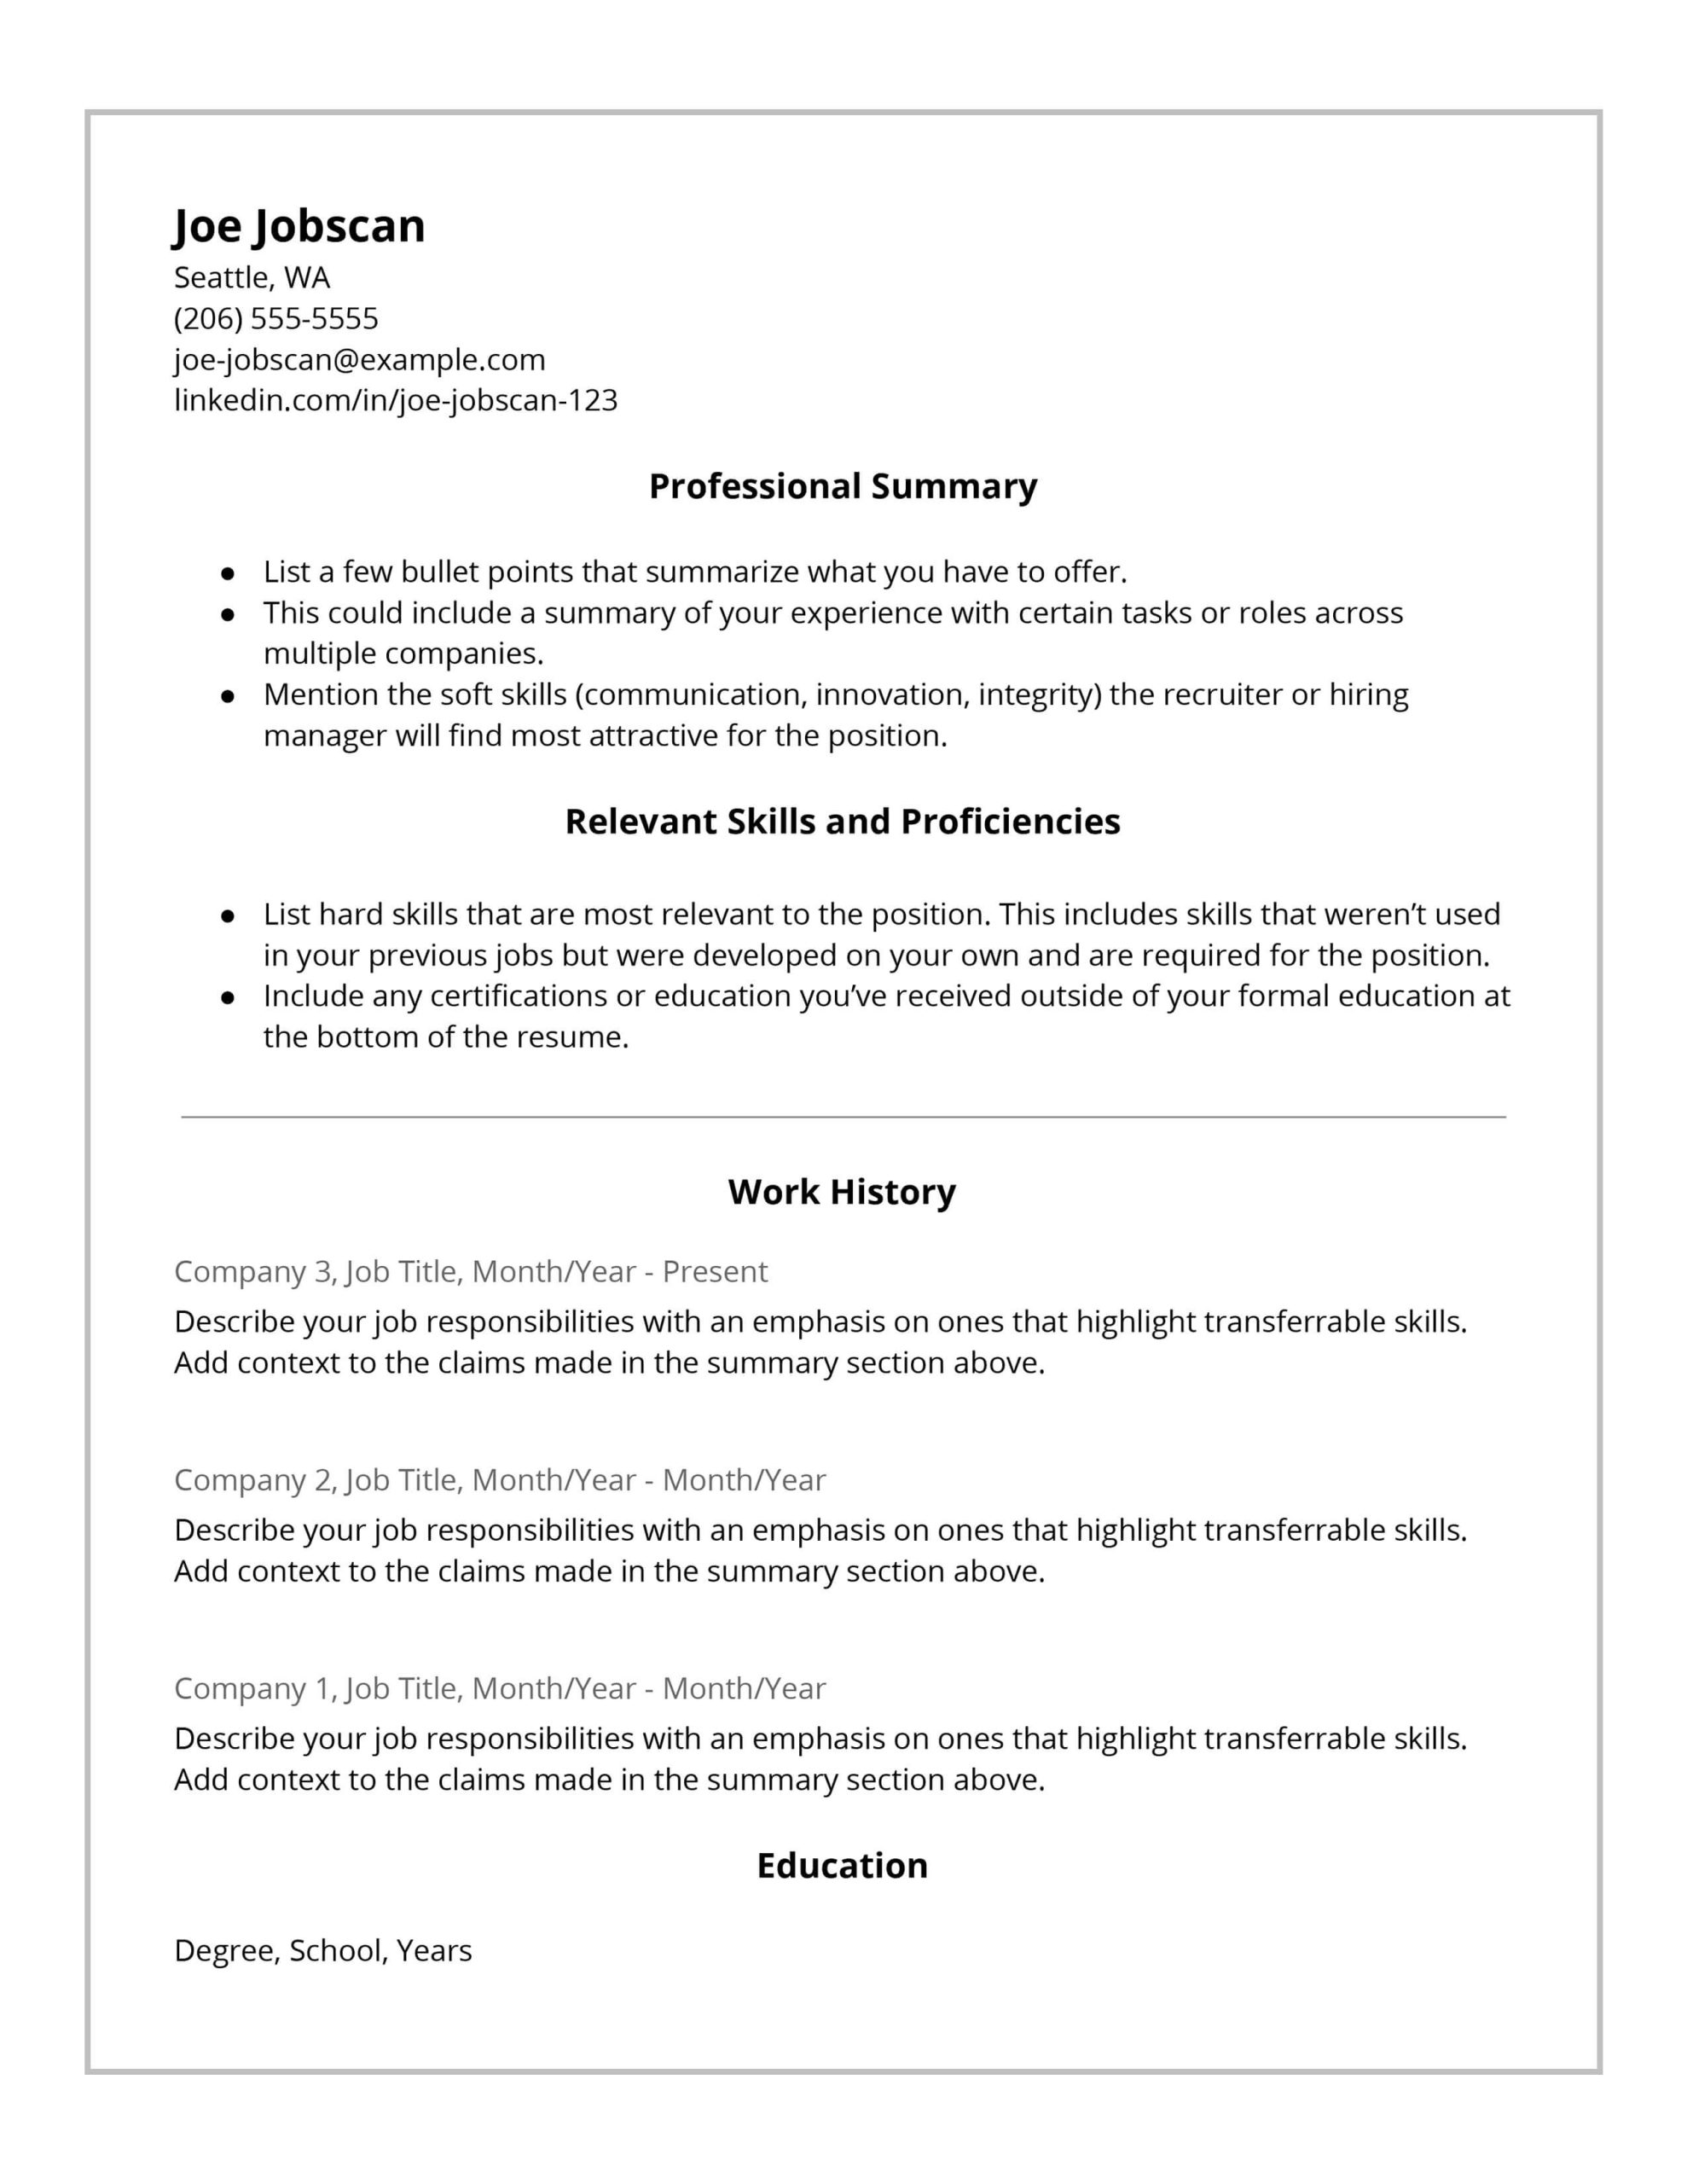 Sample Functional Resume No Work Experience Recruiters Hate the Functional Resume formatâdo This Instead